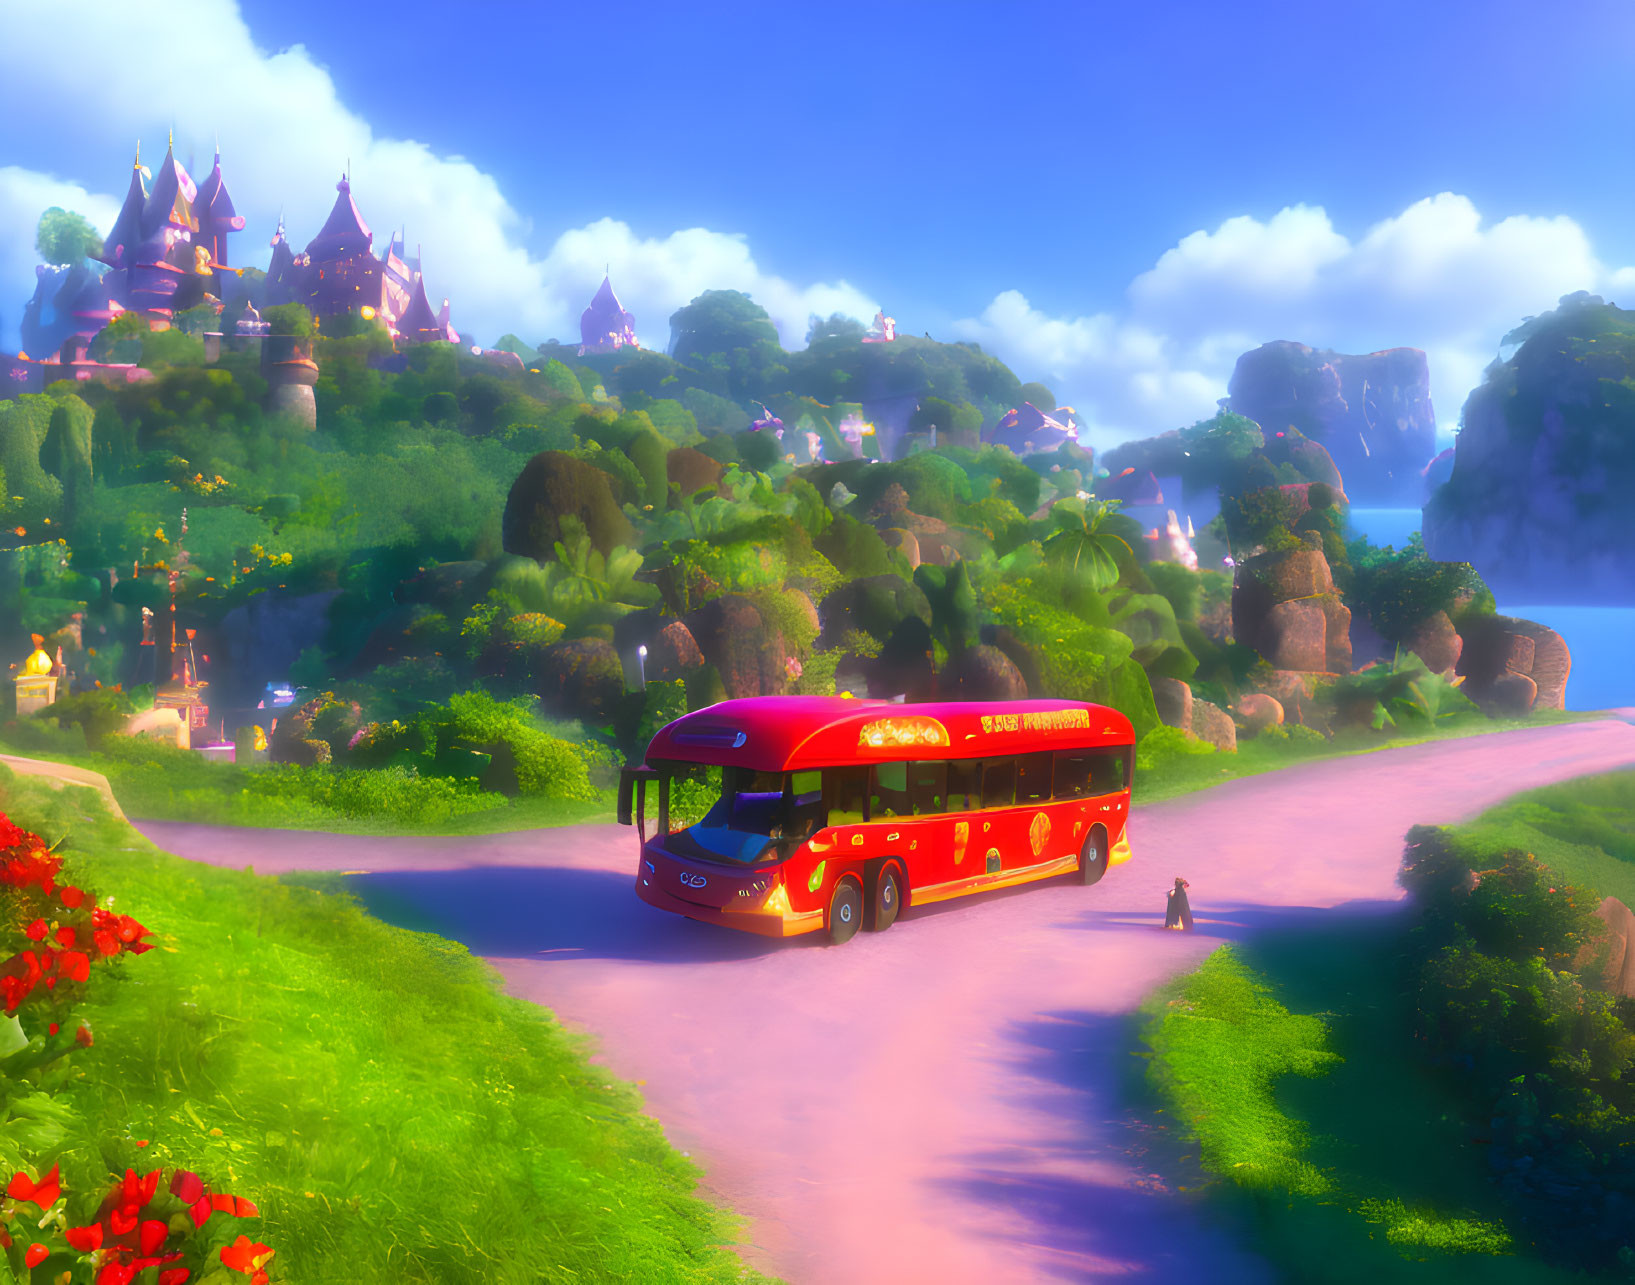 Colorful landscape with red bus, winding road, castle, and lush greenery